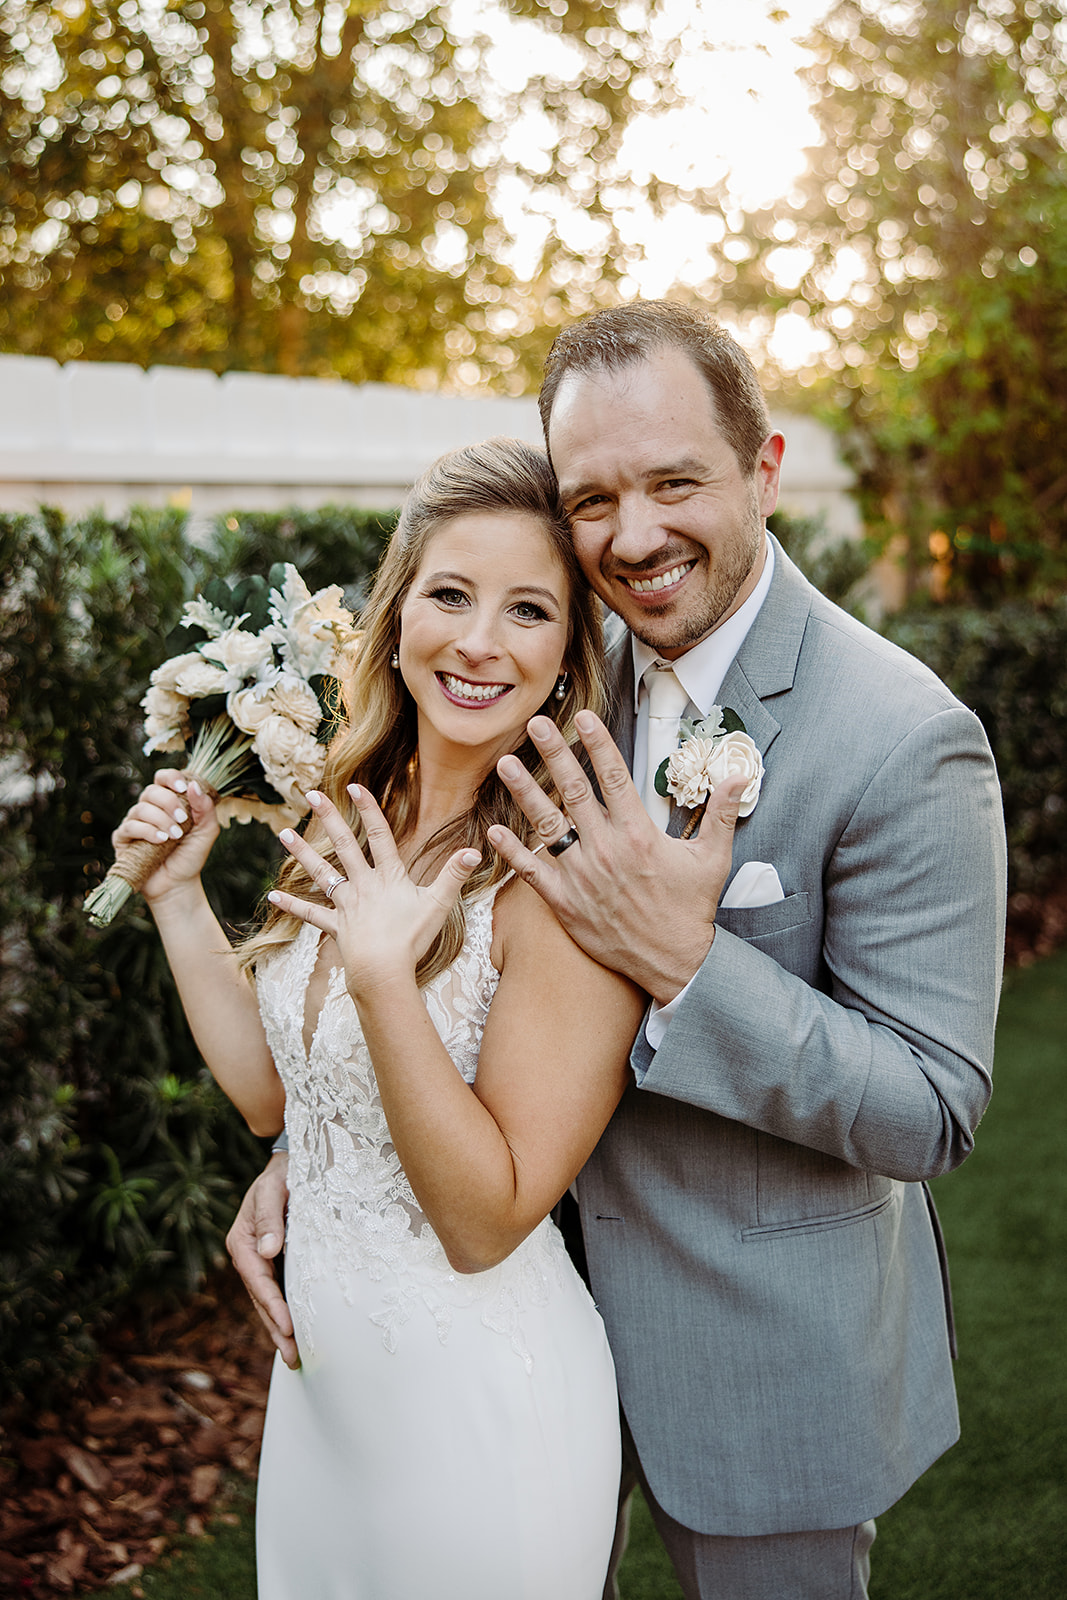 Casey and Jake showing off their rings after their wedding